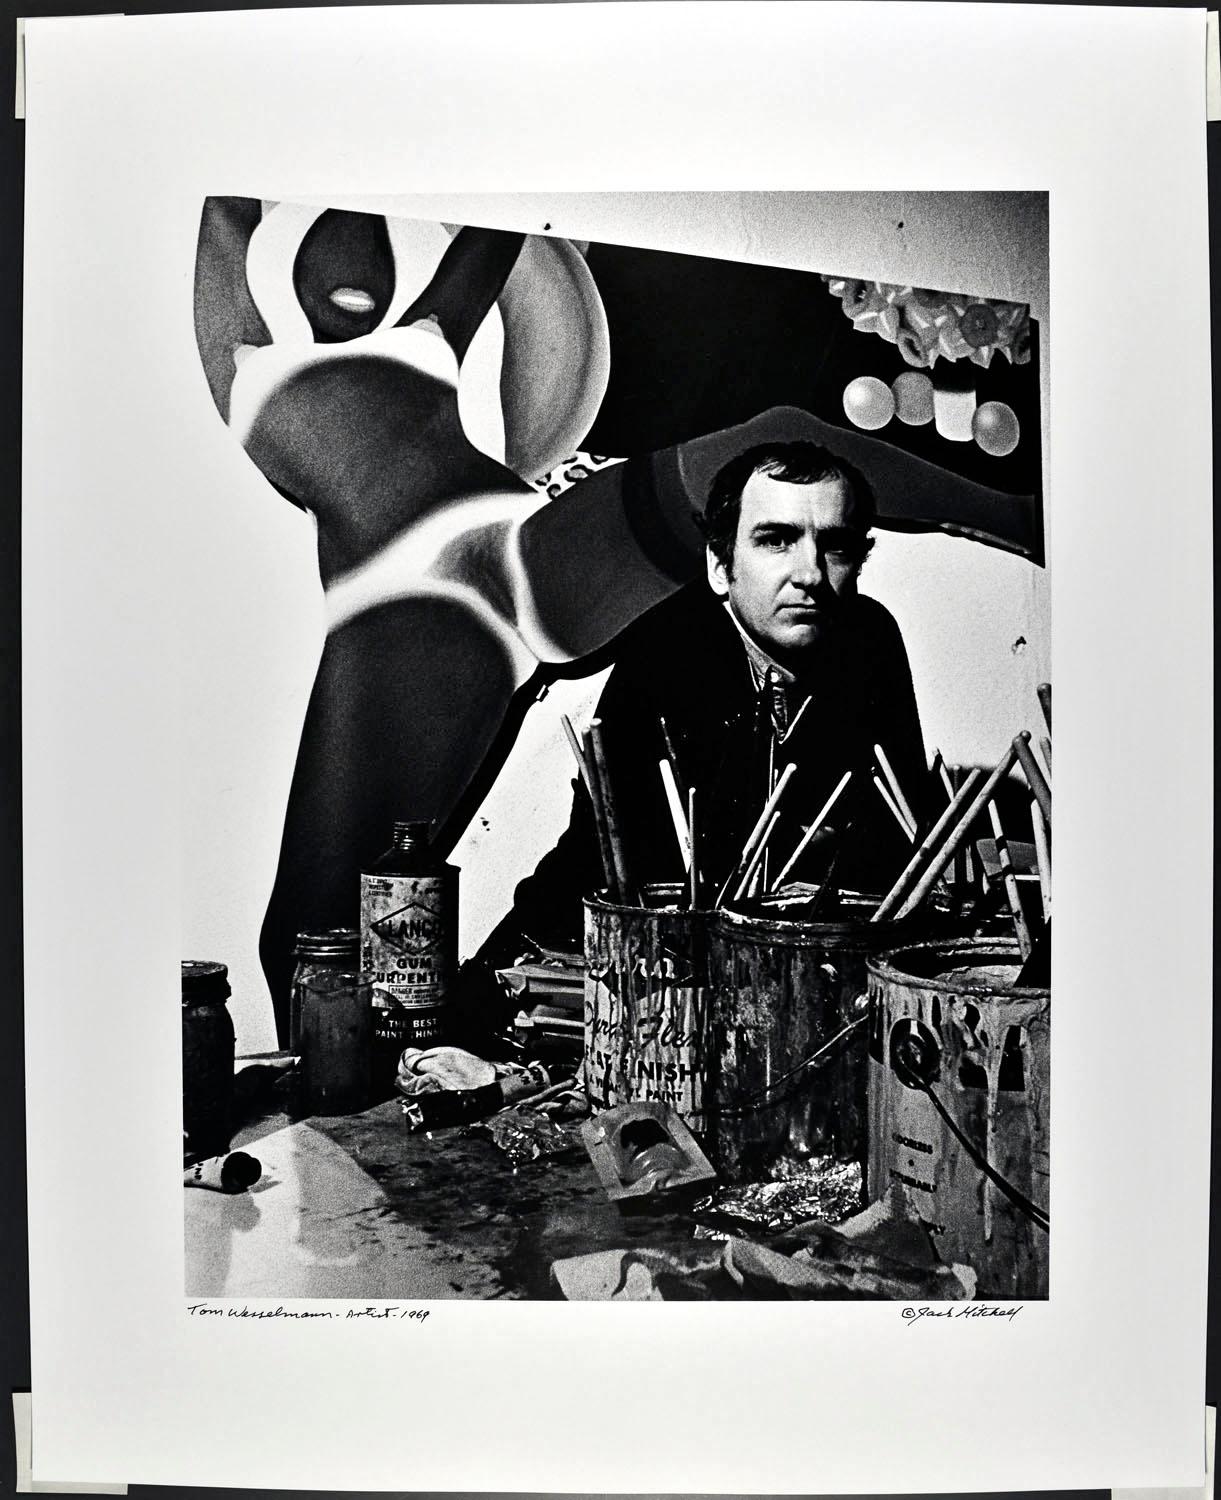 16 x 20" vintage silver gelatin photograph of artist Tom Wesselmann in his New York studio, photographed in 1969. It is signed by Jack Mitchell on the recto and in pencil on the verso. Comes directly from the Jack Mitchell Archives with a